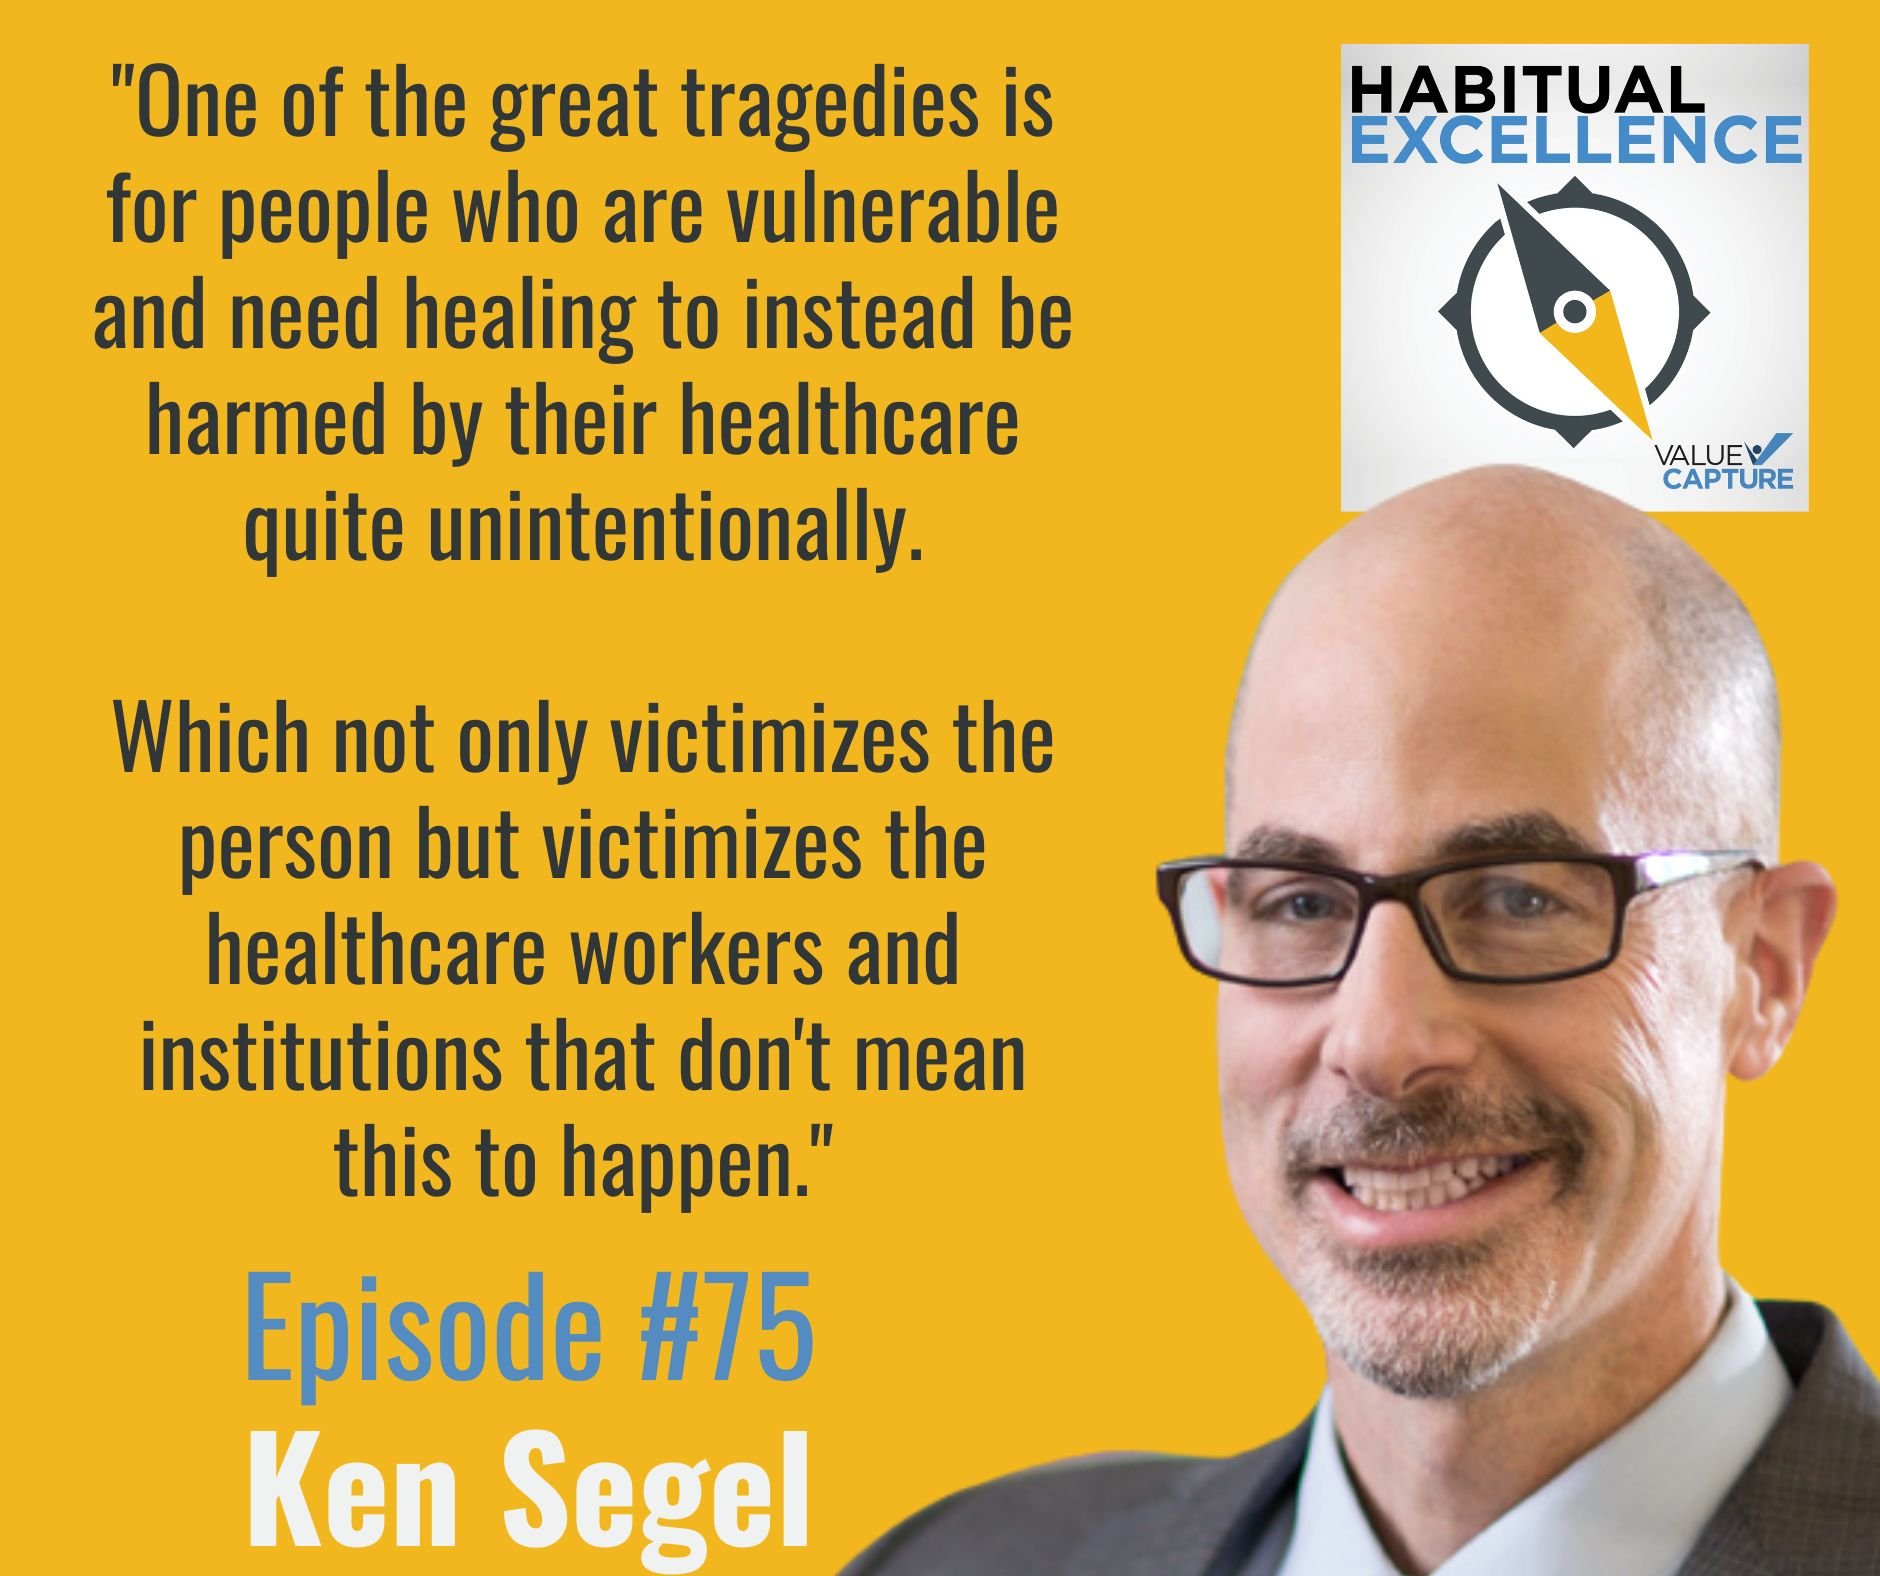 "One of the great tragedies is for people who are vulnerable and need healing to instead be harmed by their healthcare quite unintentionally.  Which not only victimizes the person but victimizes the healthcare workers and institutions that don't mean this to happen." Ken Segel